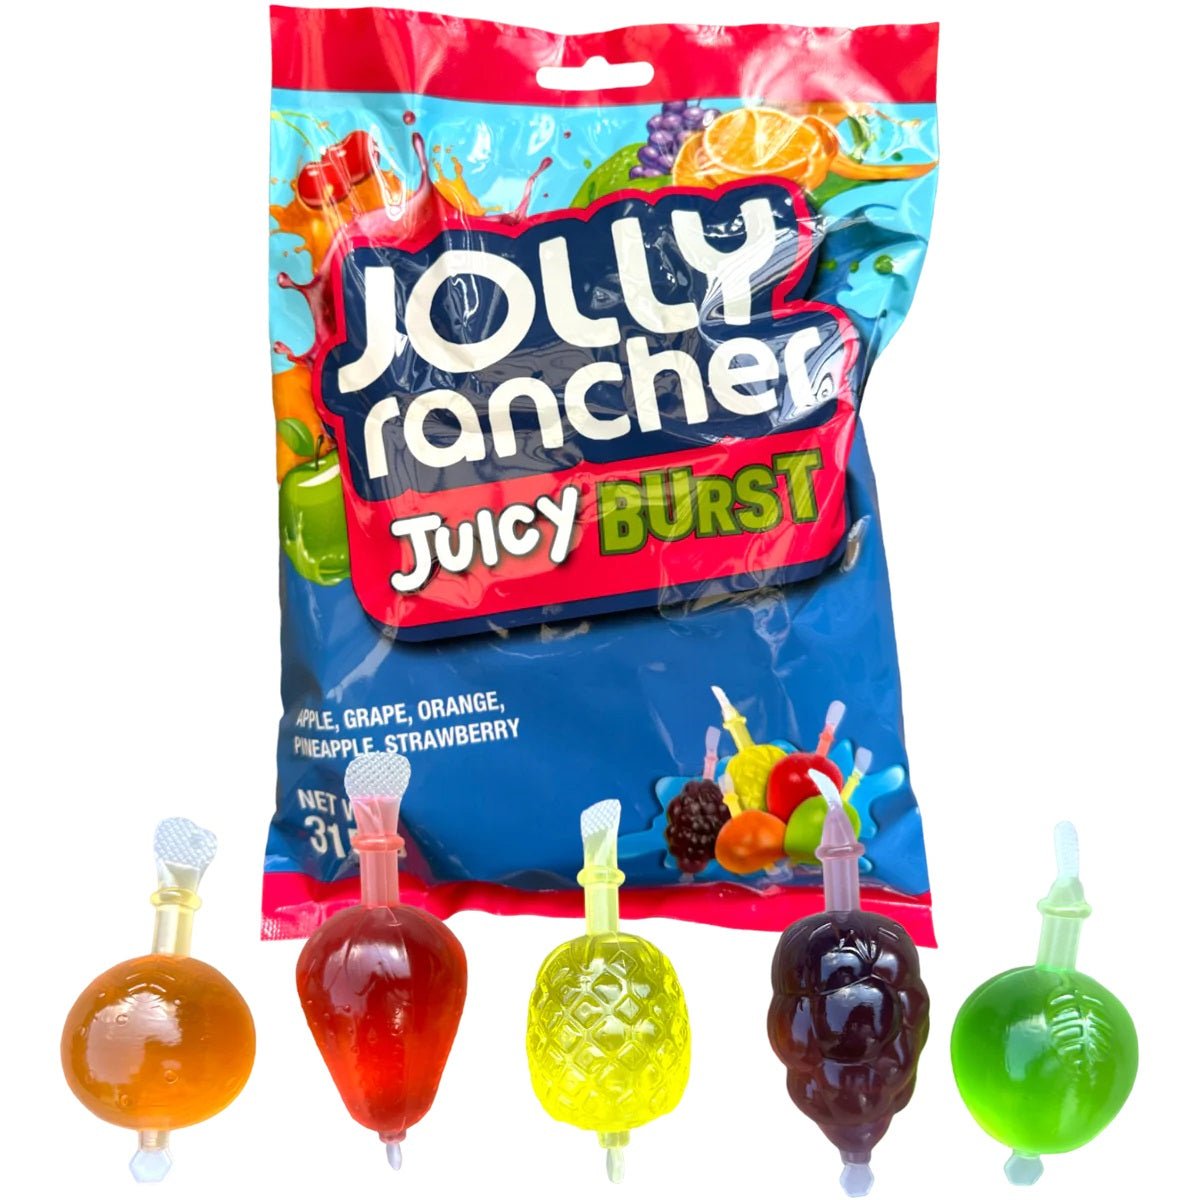 Jolly Rancher Juicy Burst 315g - Candy Mail UK